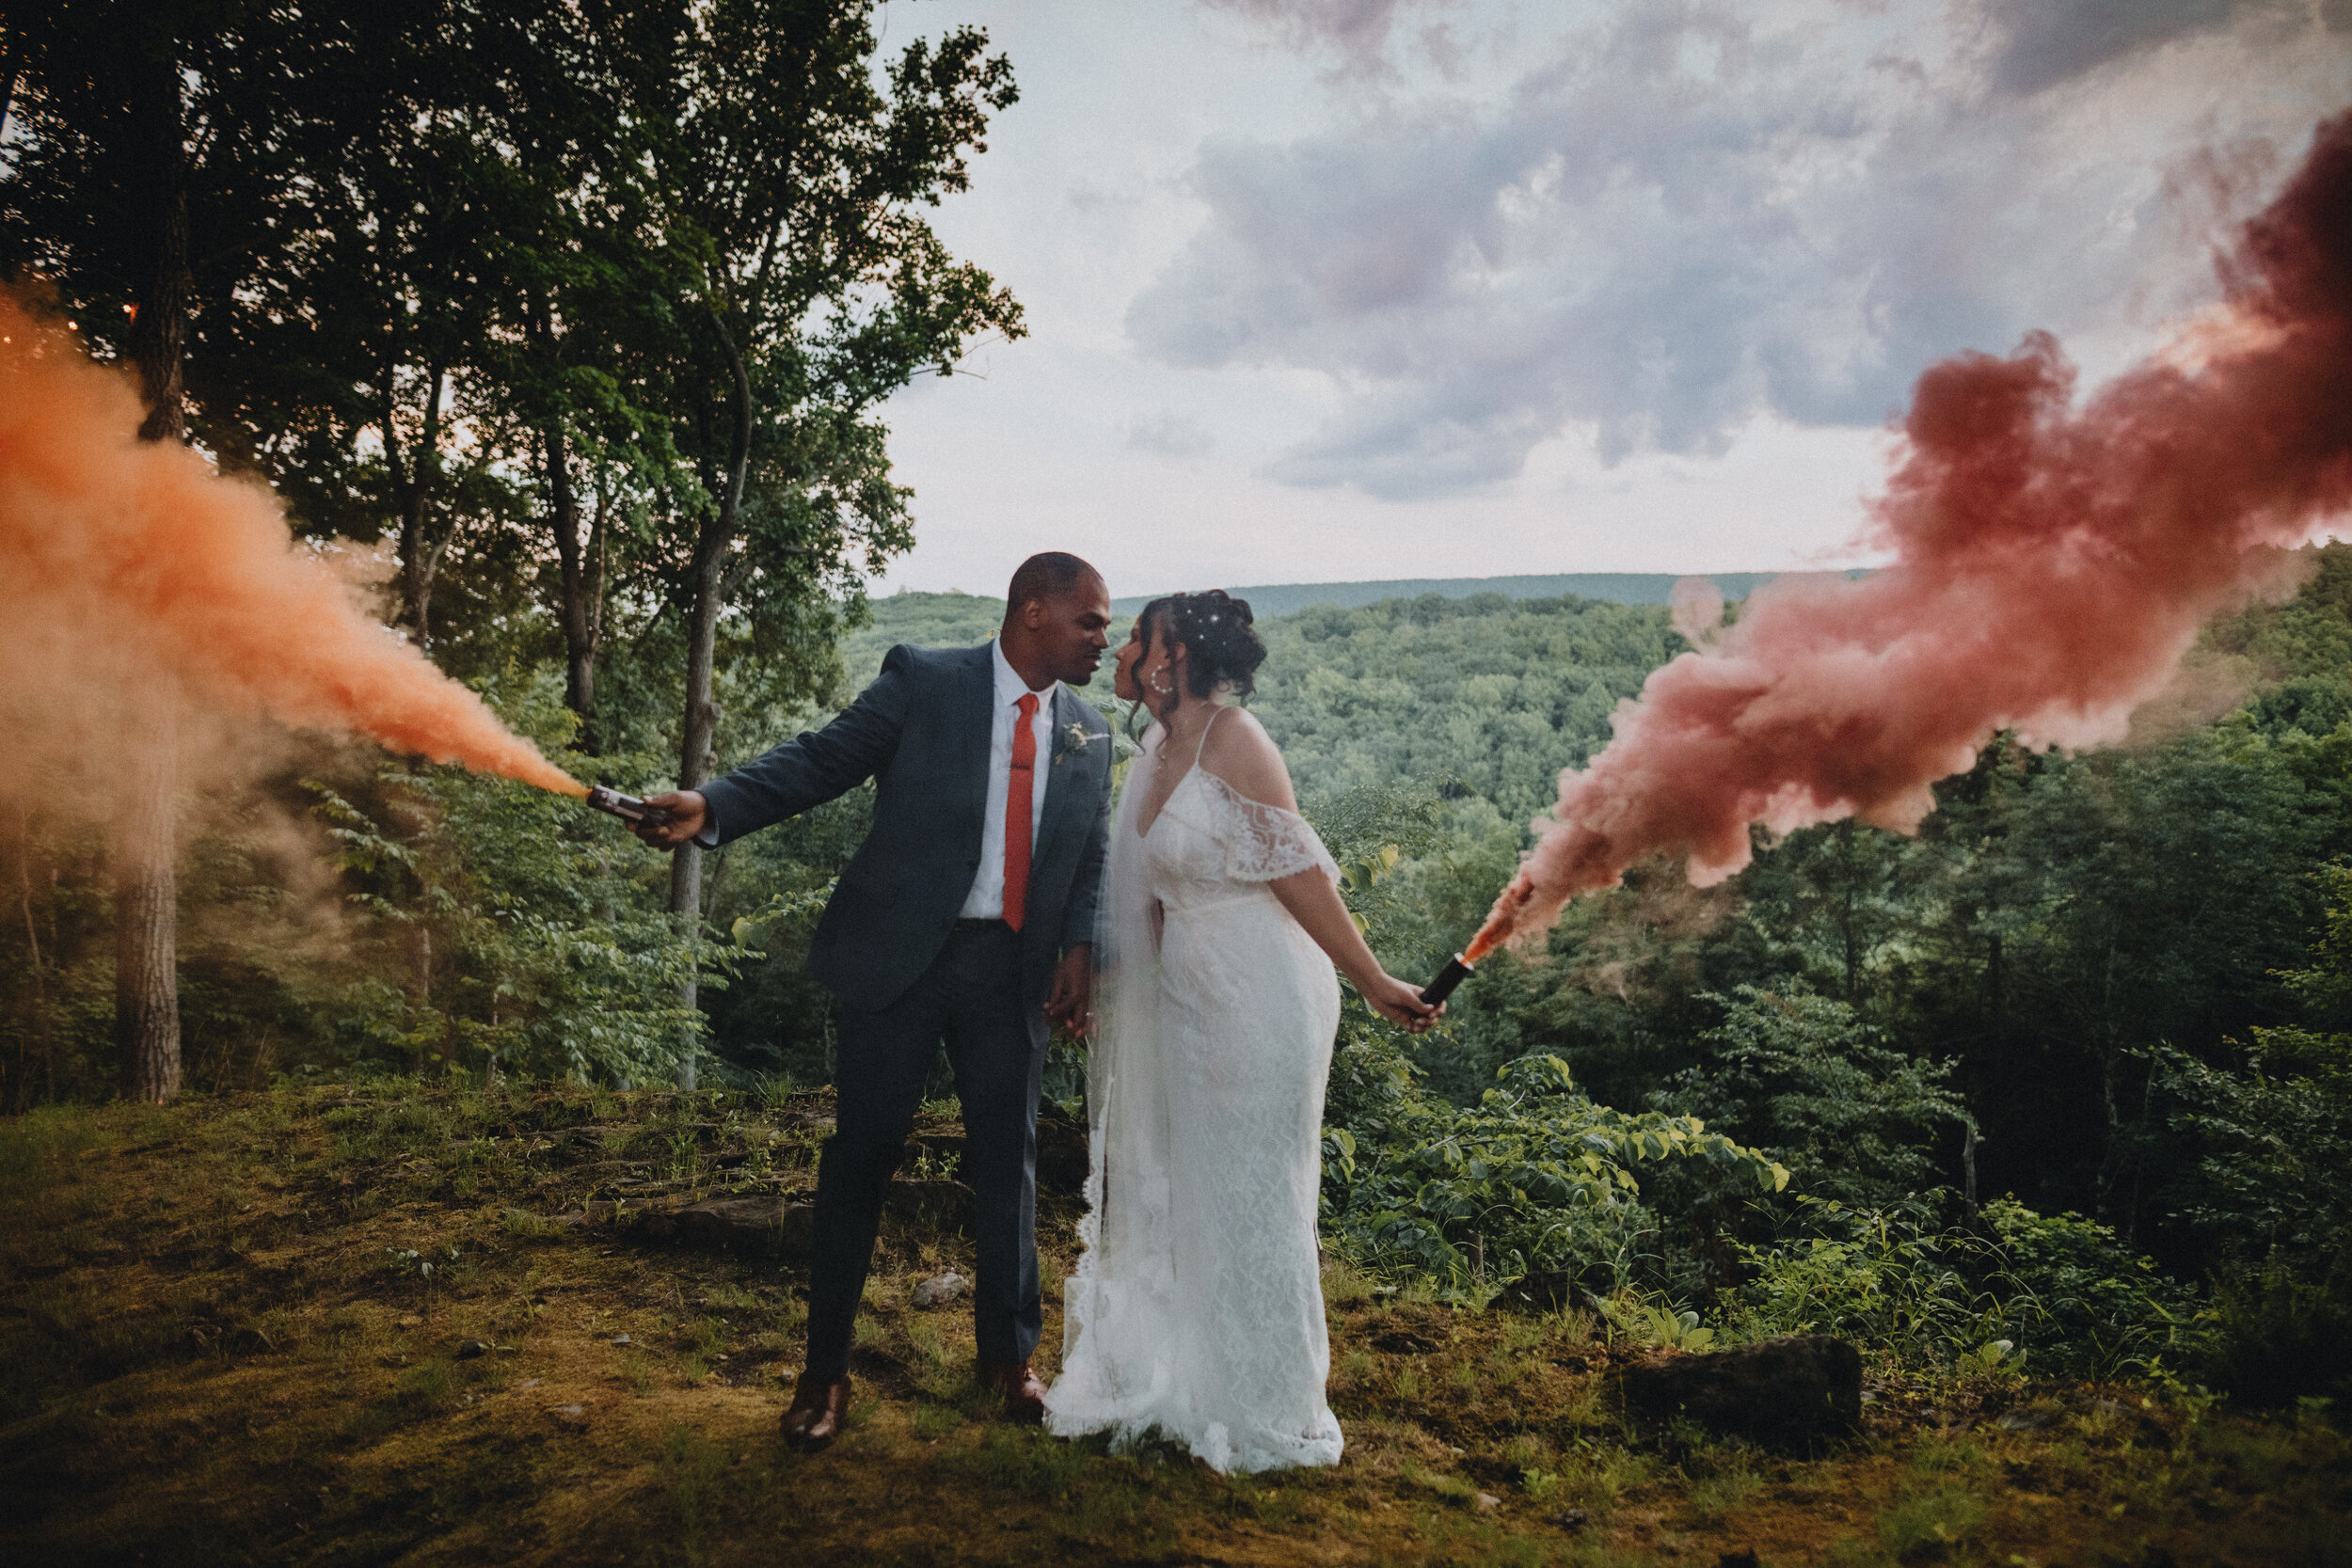 Nestled in the Pocono Mountains and surrounded by their closest loved ones, Melissa and Jaquion said their vows as they overlooked the Appalachian trail at the intimate Promise Ridge in Stroudsburg, Pennsylvania.